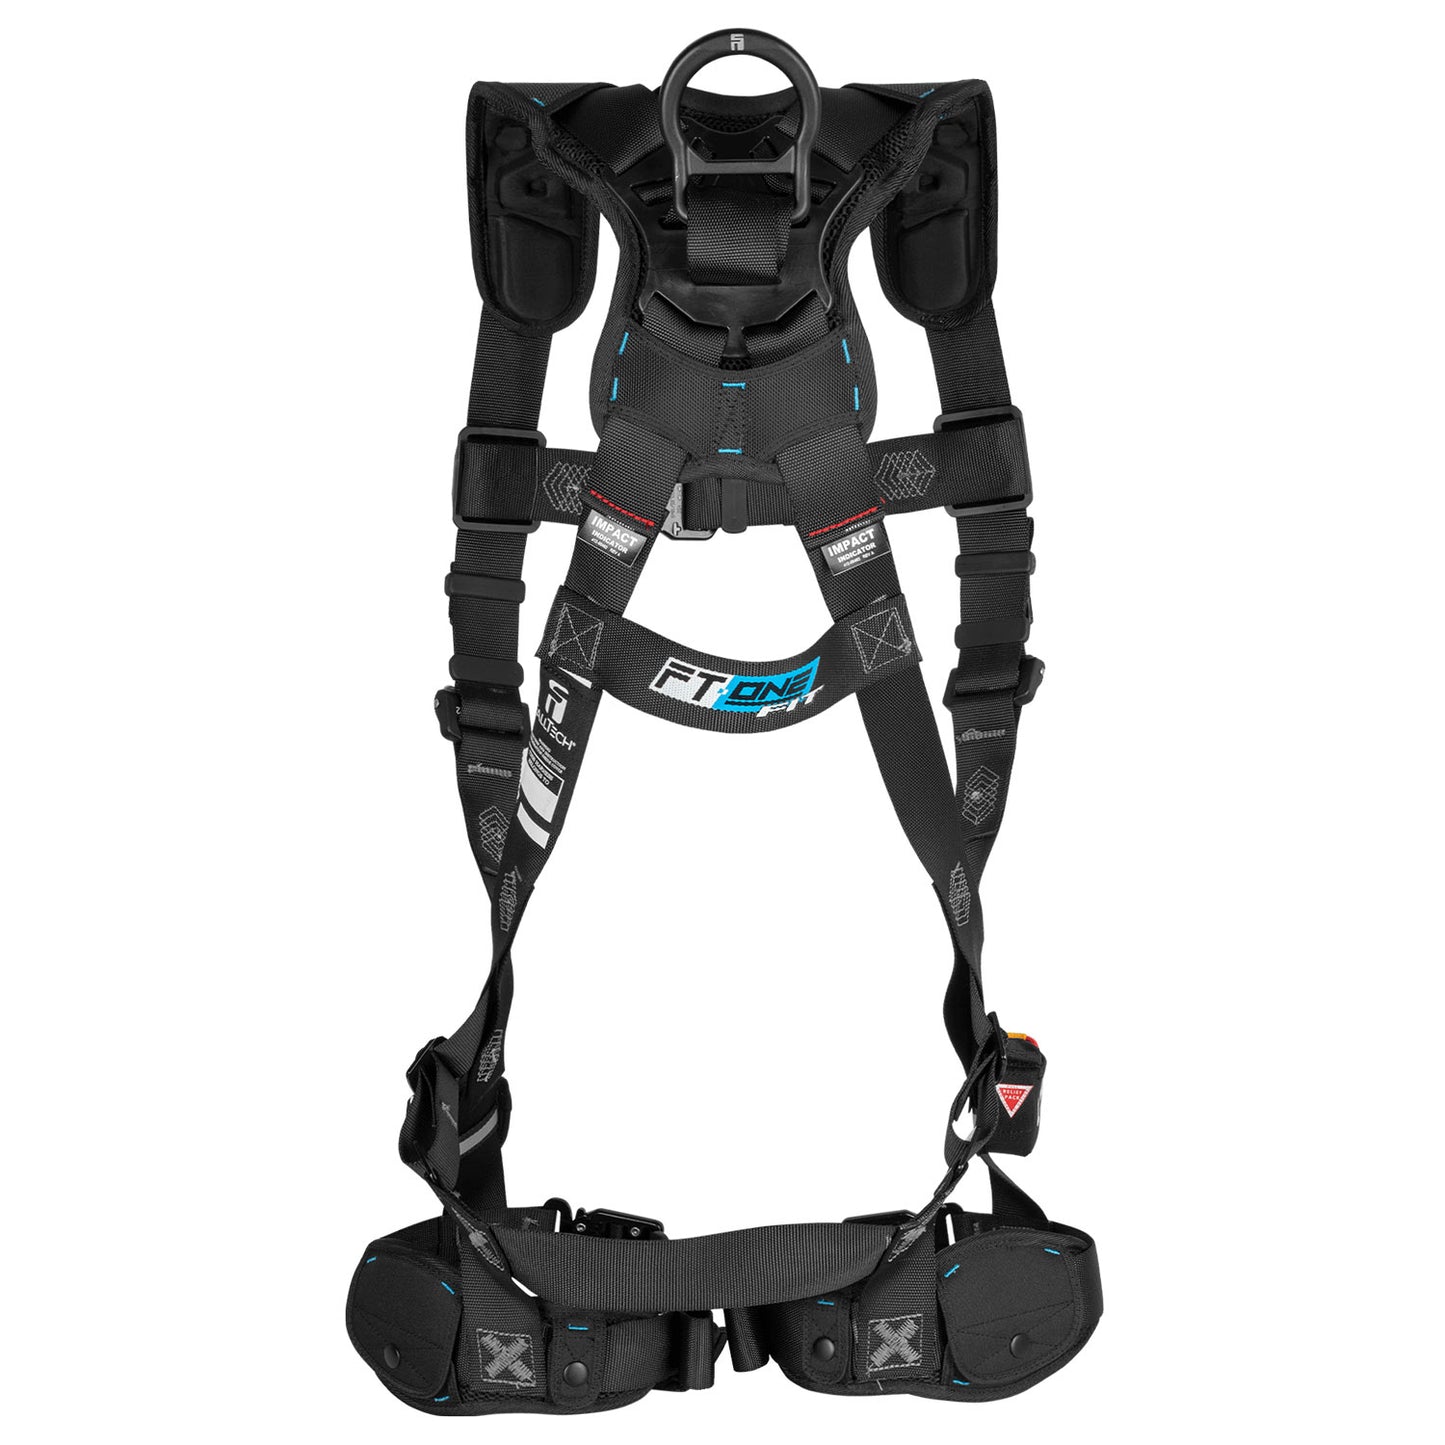 FallTech FT-One Fit Women's Safety Harness w/ Trauma Straps | Non-Belted | M | 8129QCM